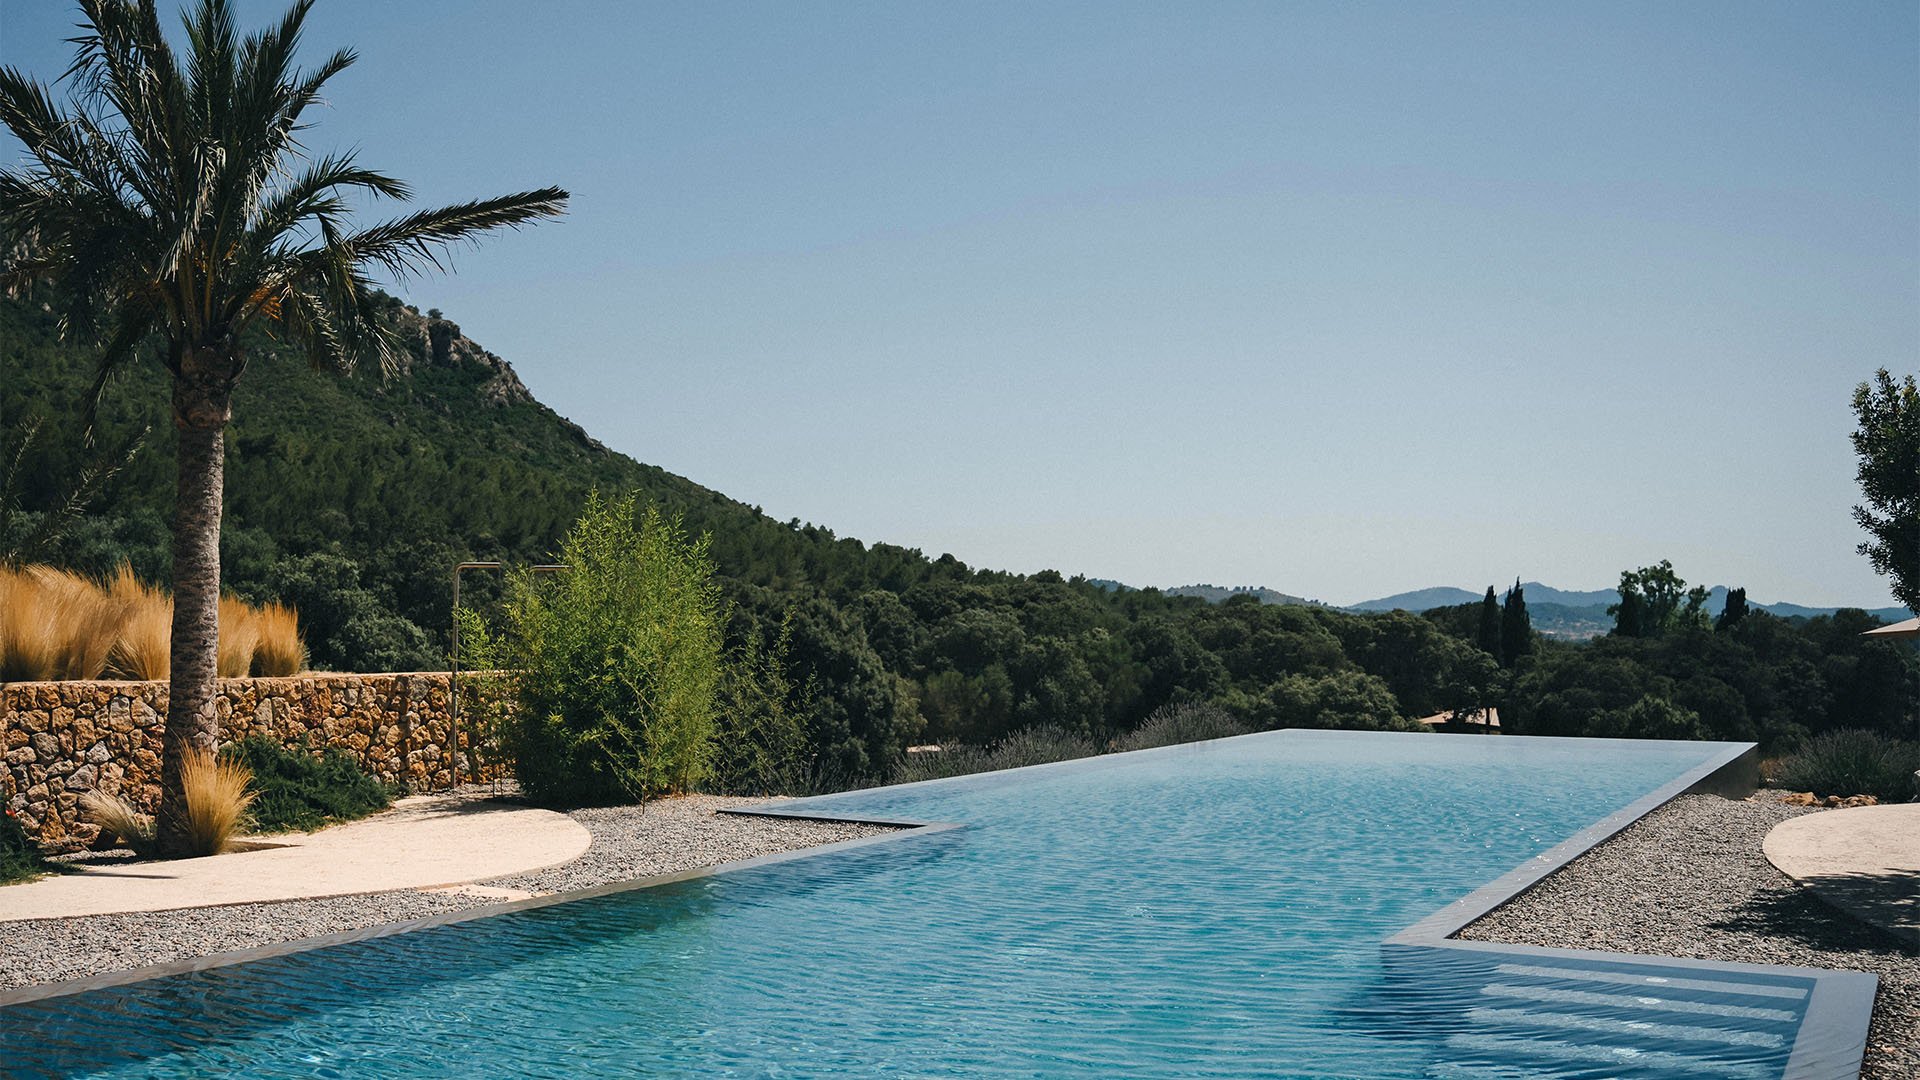 Luxury eco hotel with view 5* Mallorca Spain - Es Raco d'Arta - swimming pool